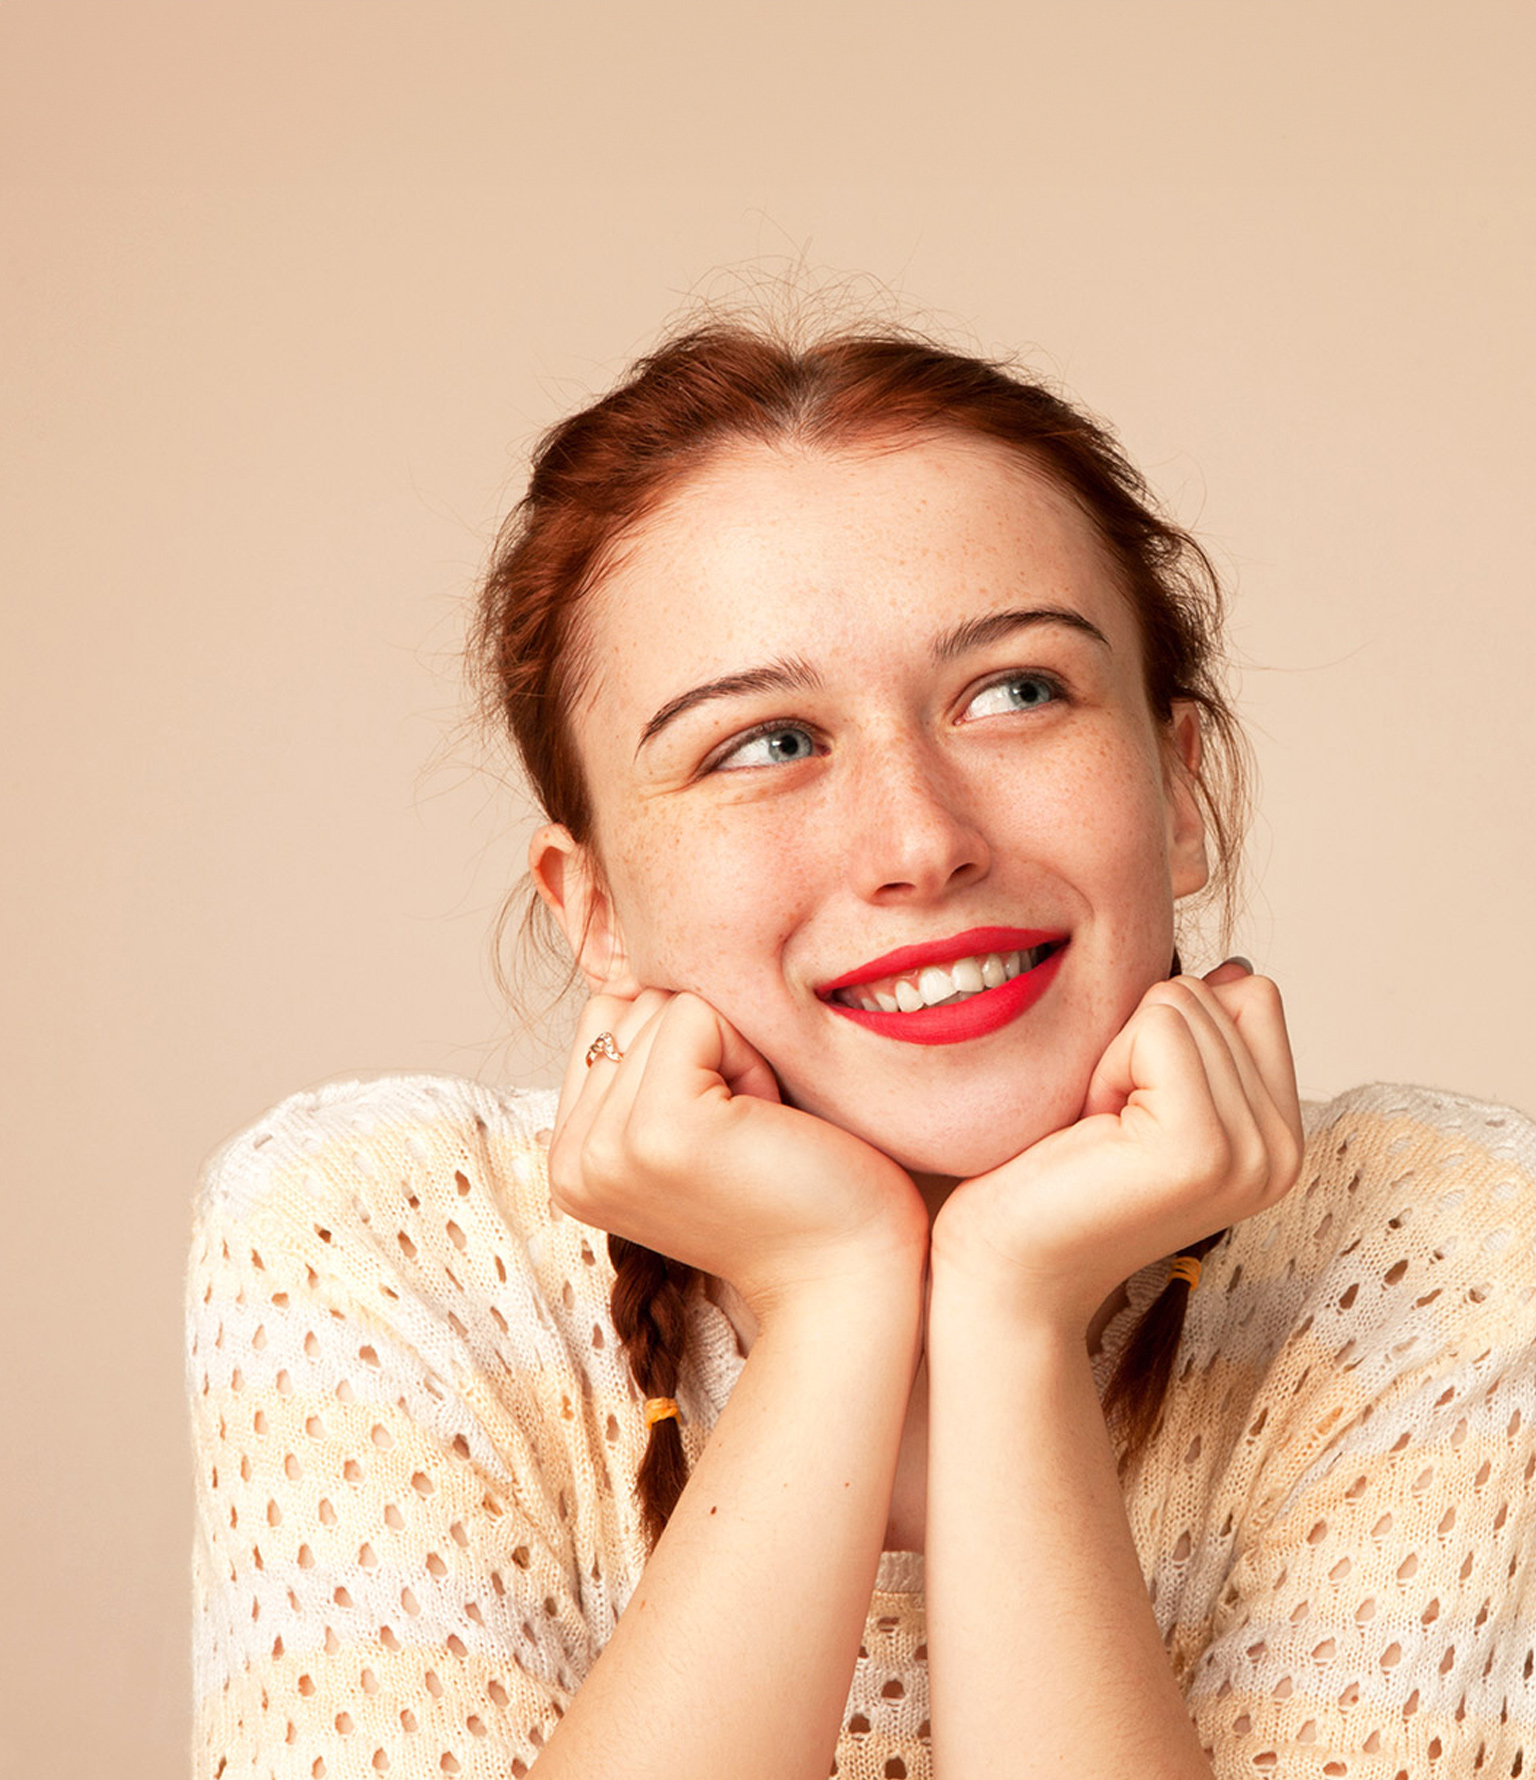 teenage girl with red lipstick and red hair smiling with head in hands on peach backdrop